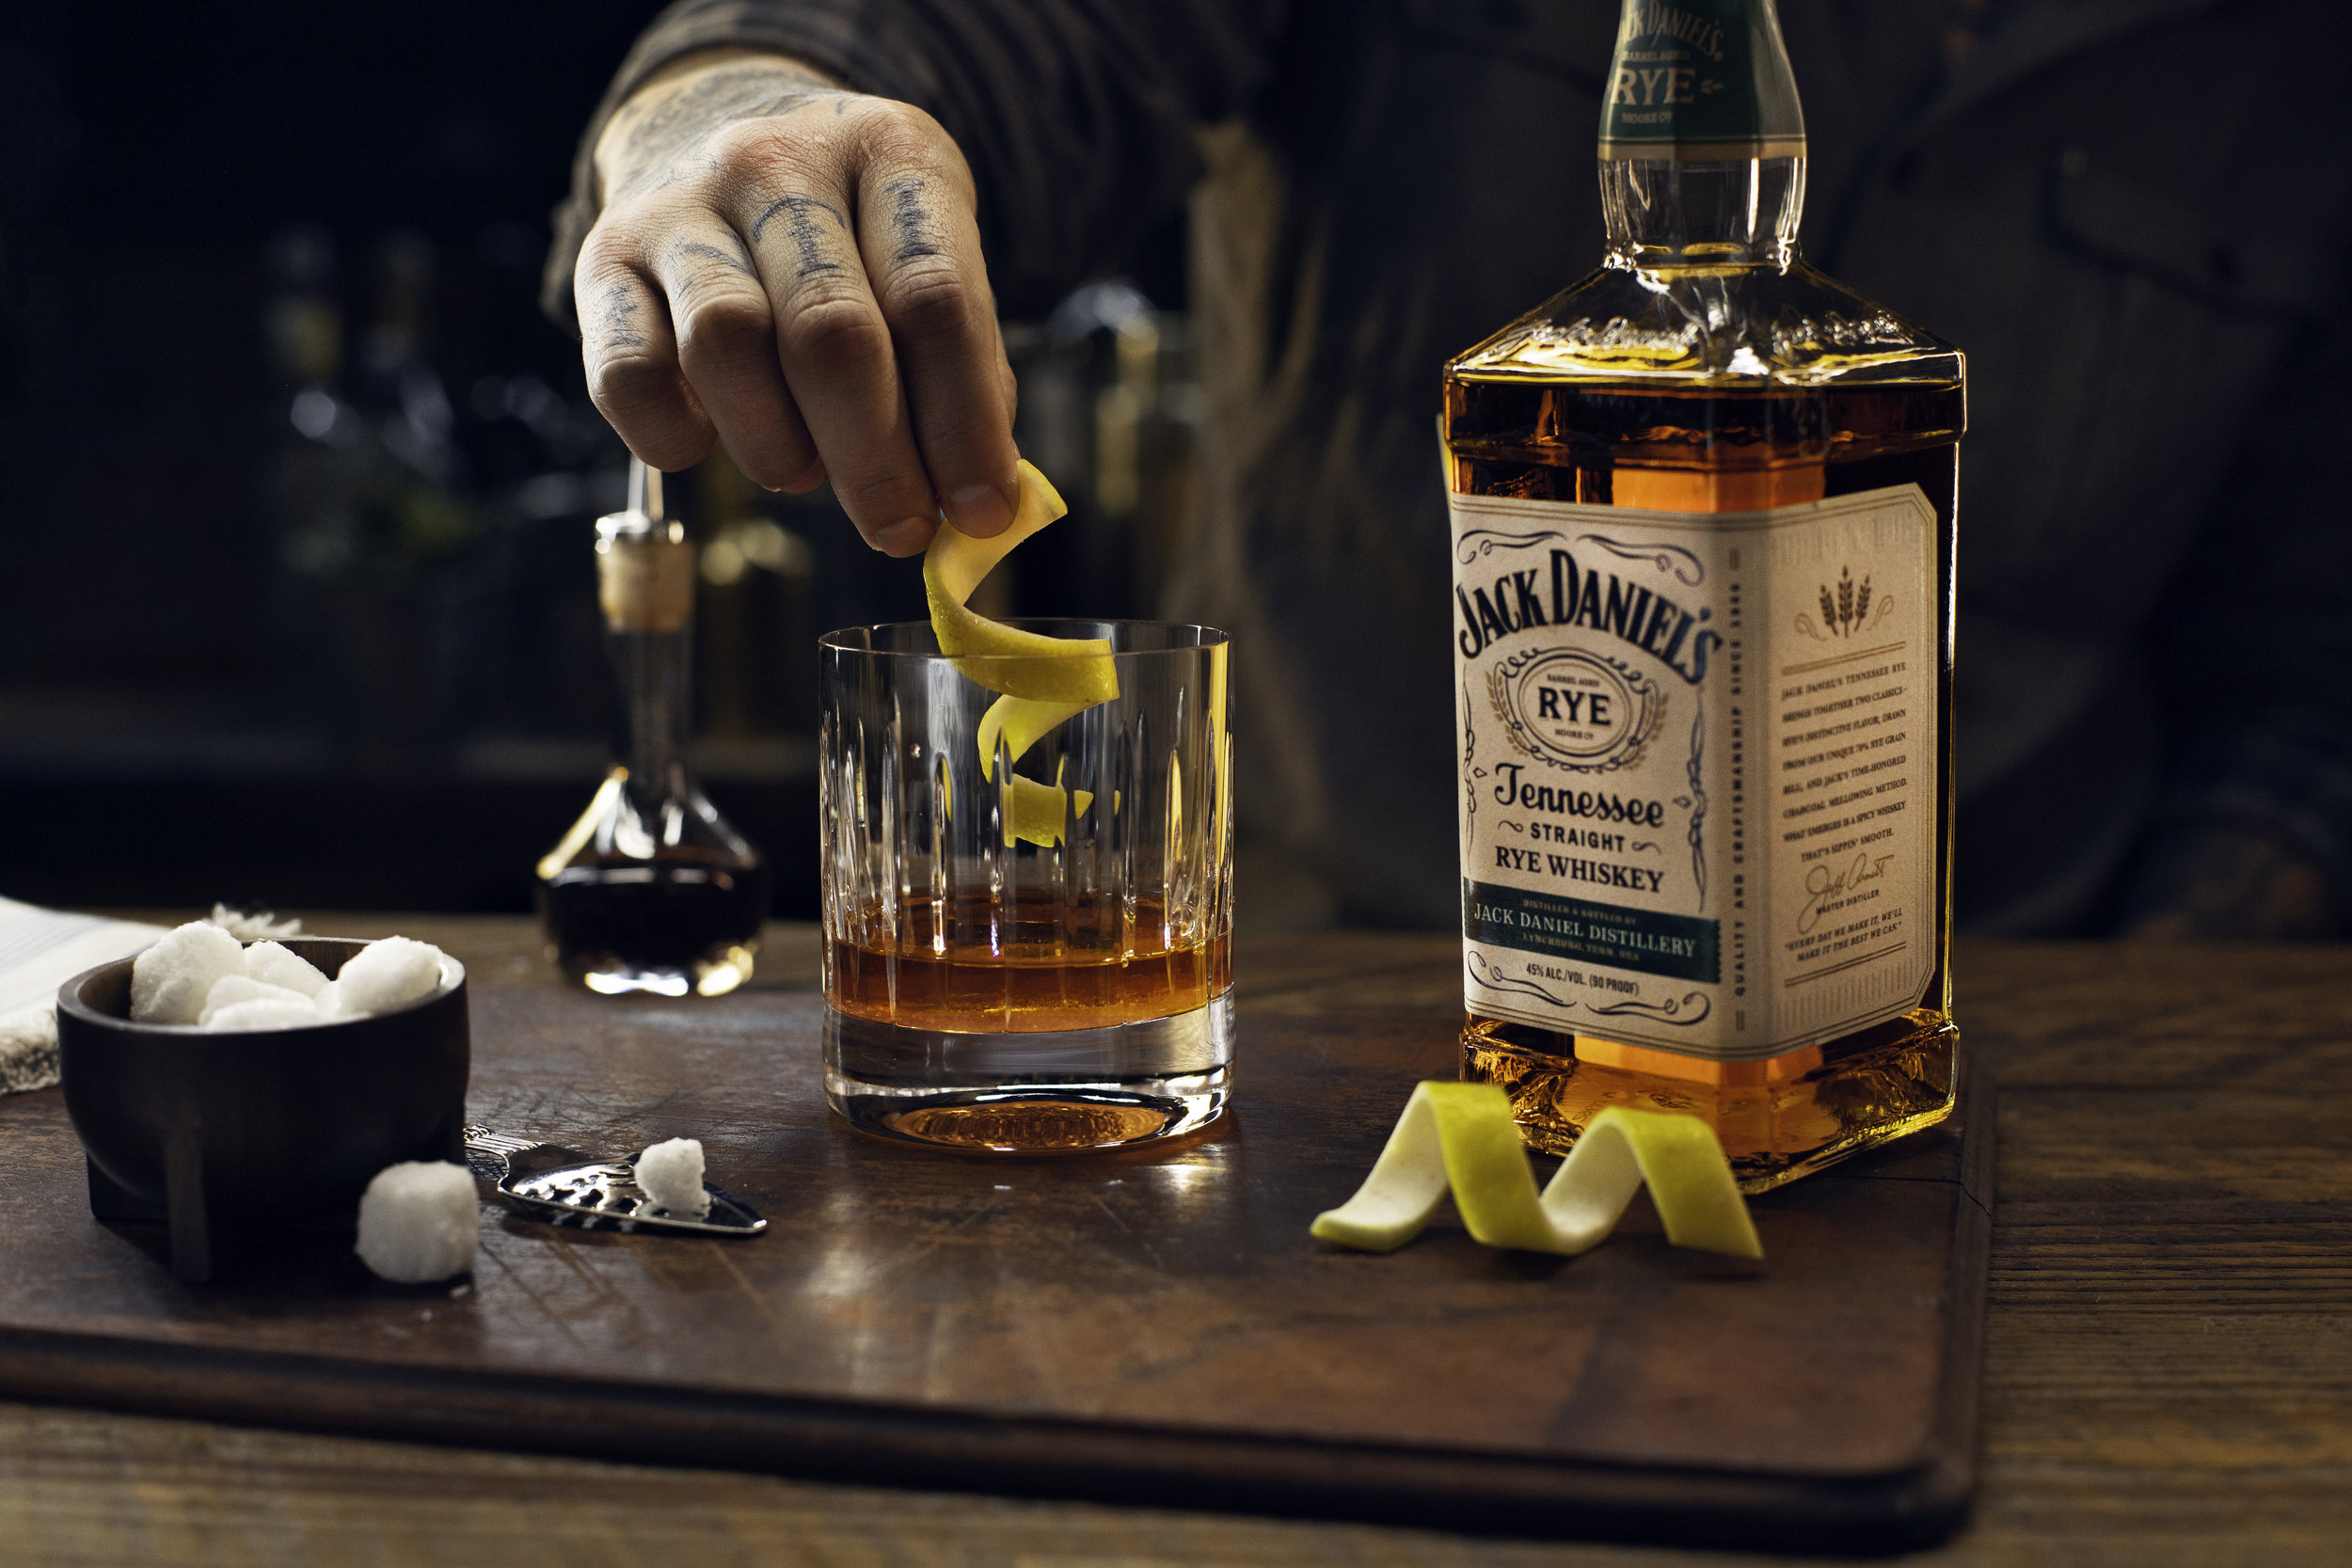 Featured image for “Jack Daniels”